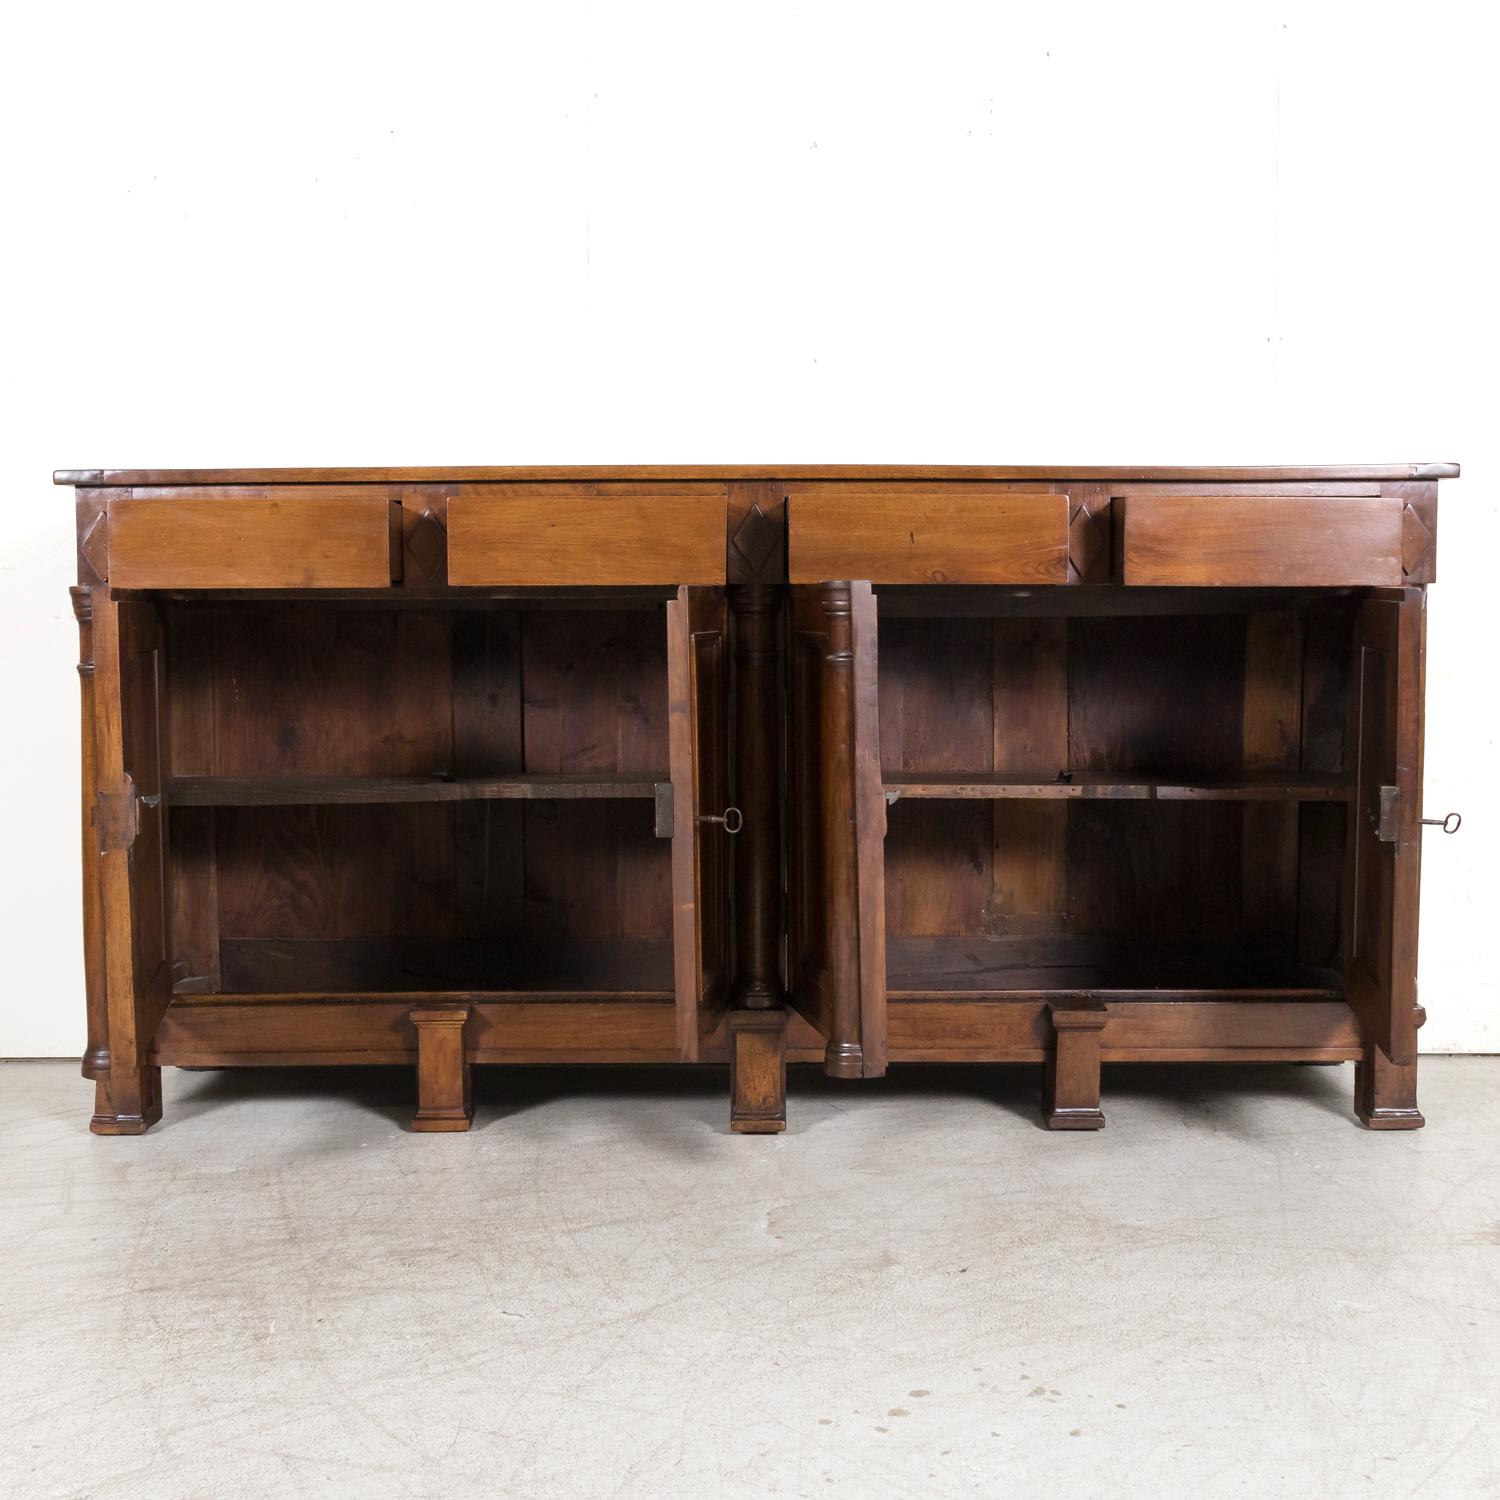 Early 19th Century 18th Century French Empire Period Solid Walnut Lyonnaise Enfilade Buffet